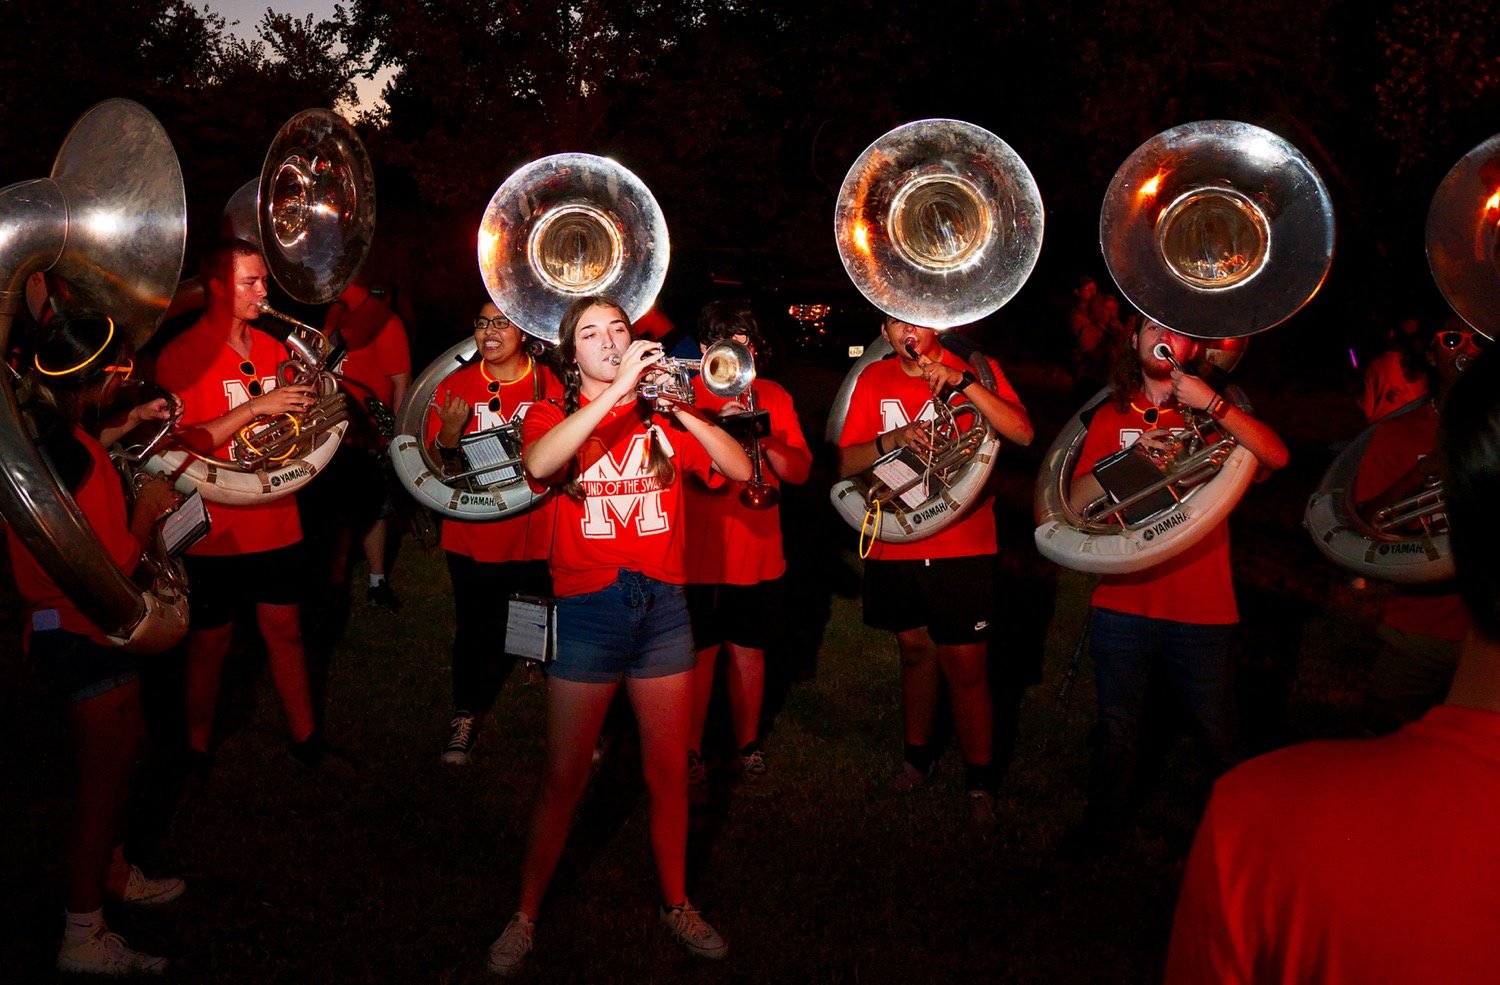 No pep rally is complete without rhythm and tunes, and the Sound of the Swarm brought the sonic entertainment to the bonfire last Wednesday. Here senior trumpeter Ali Jordan, accompanied by the tuba section, serenades the crowd.